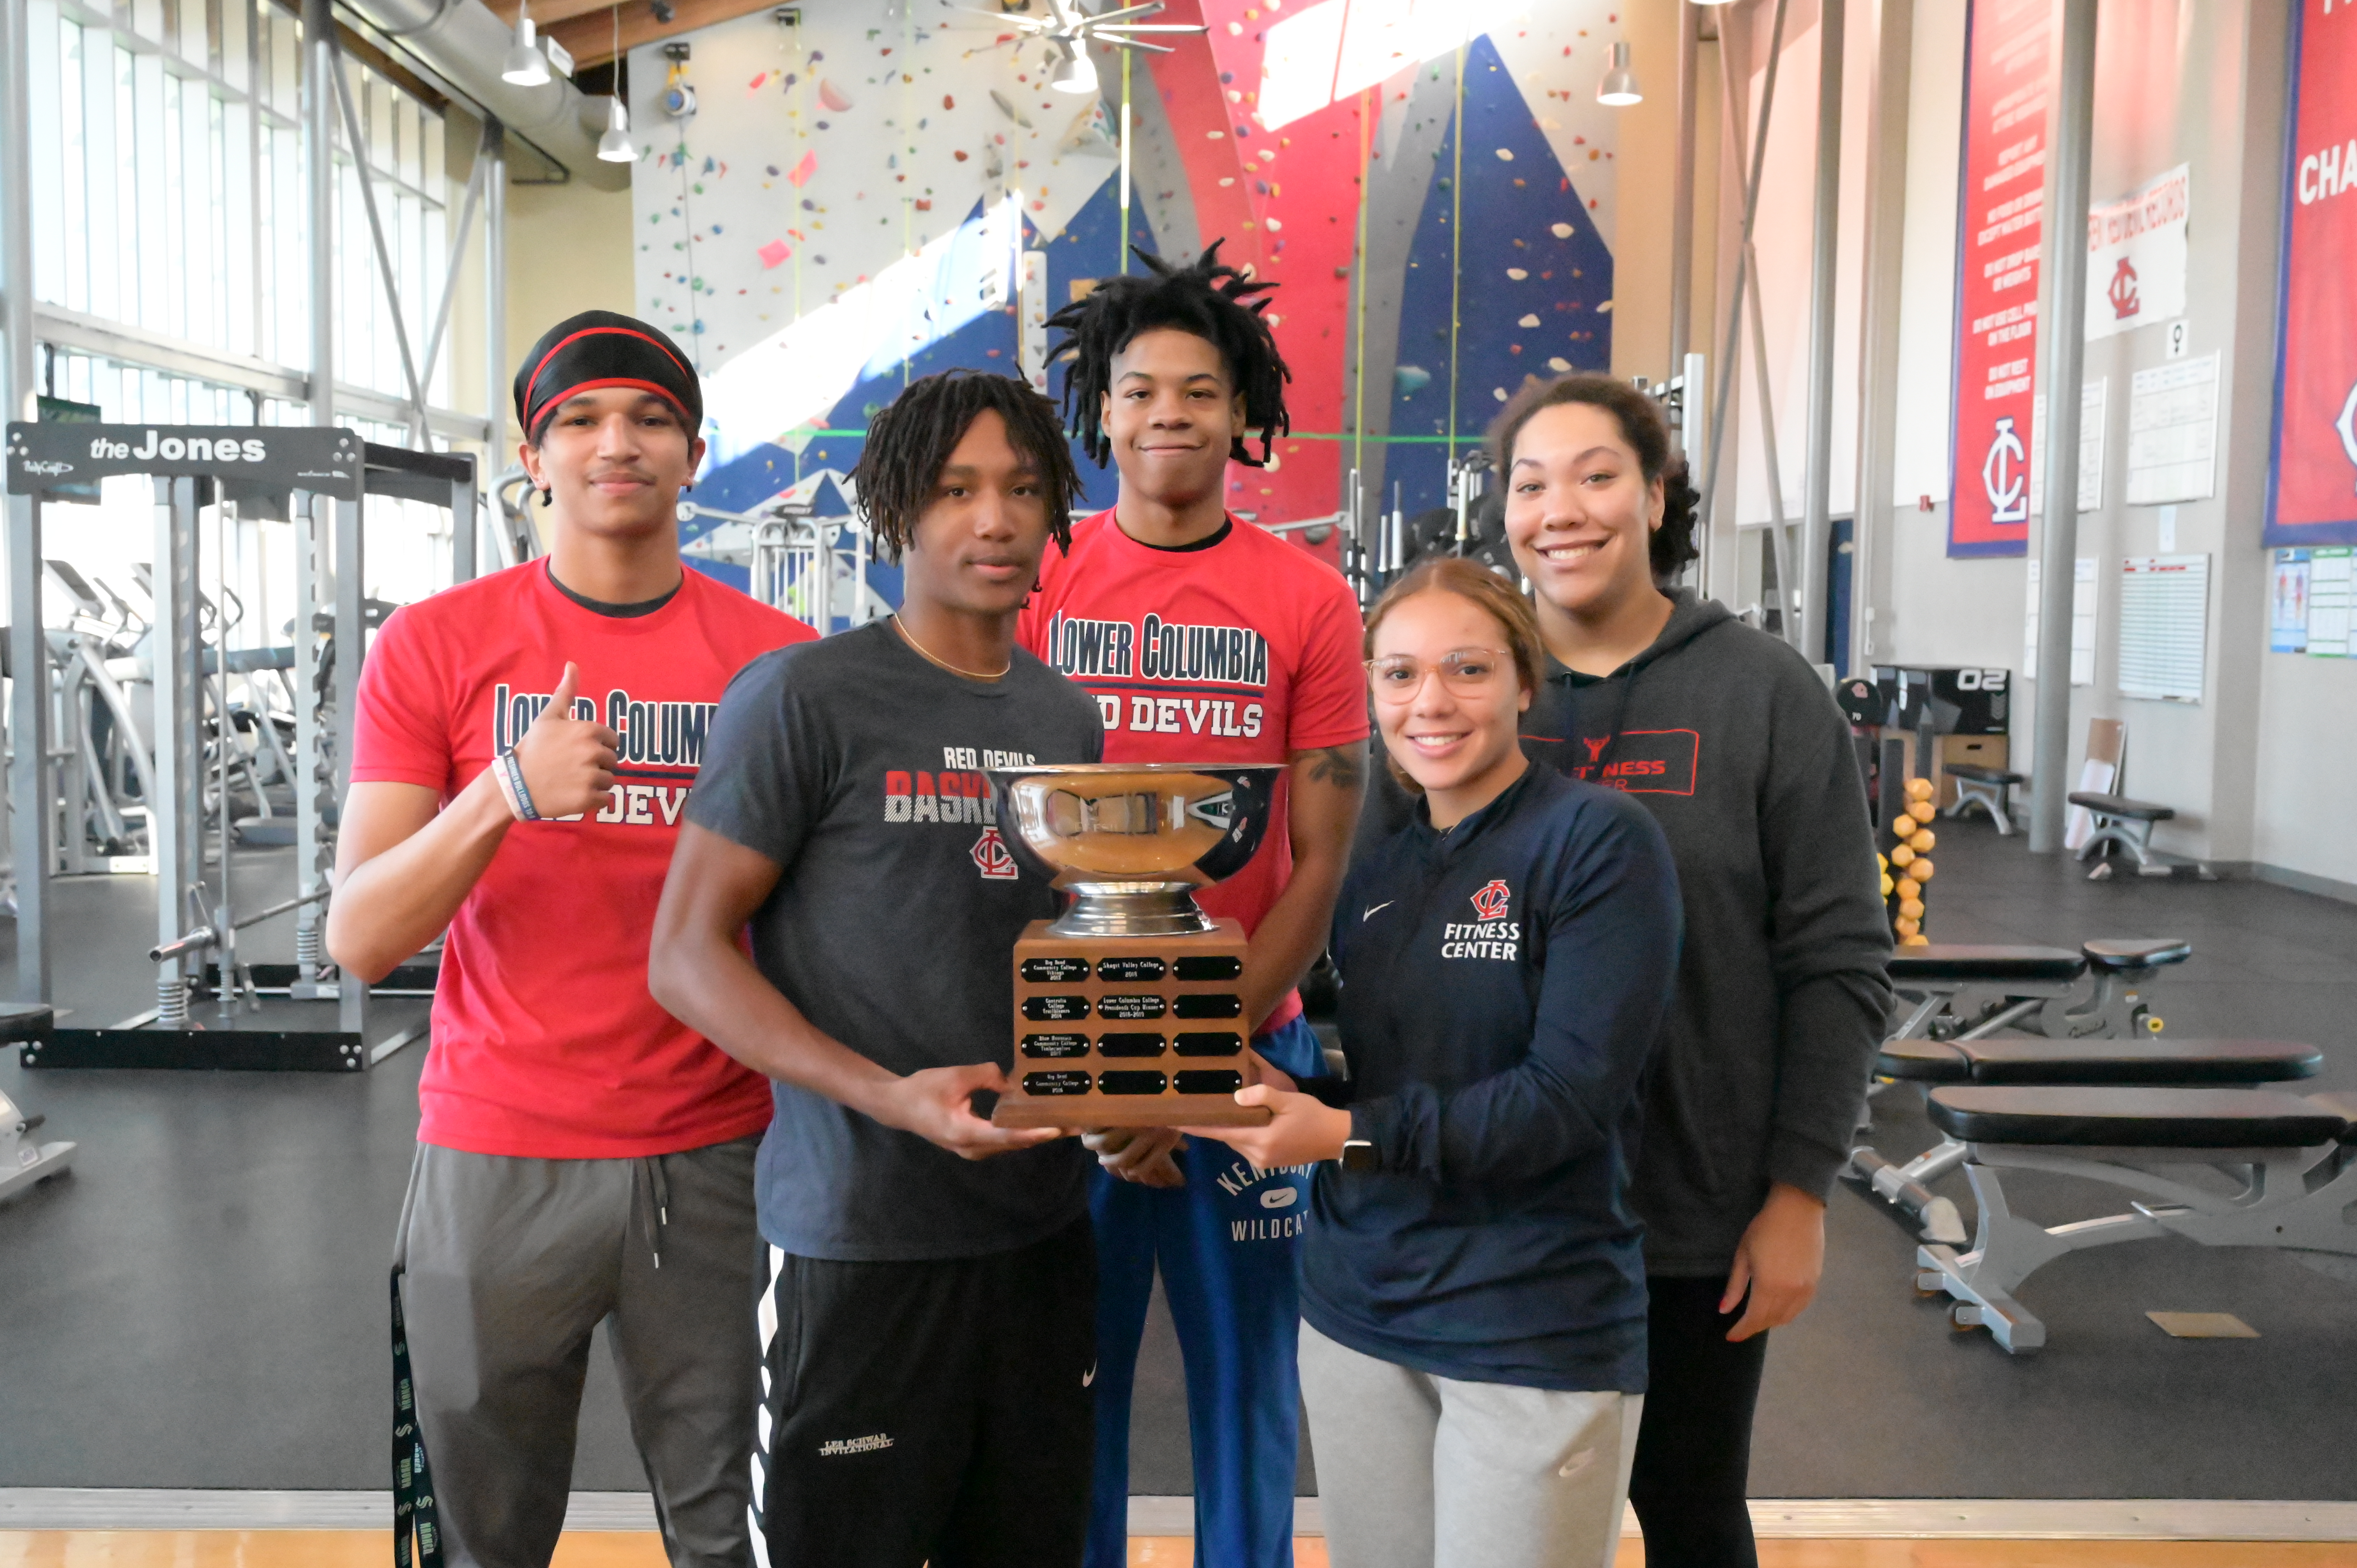 From left to right, David Young, Keshawn Lewis, Amir Locus, Maliyah Twitty and Kate Johnson show off the 2019 Presidents Cup award.